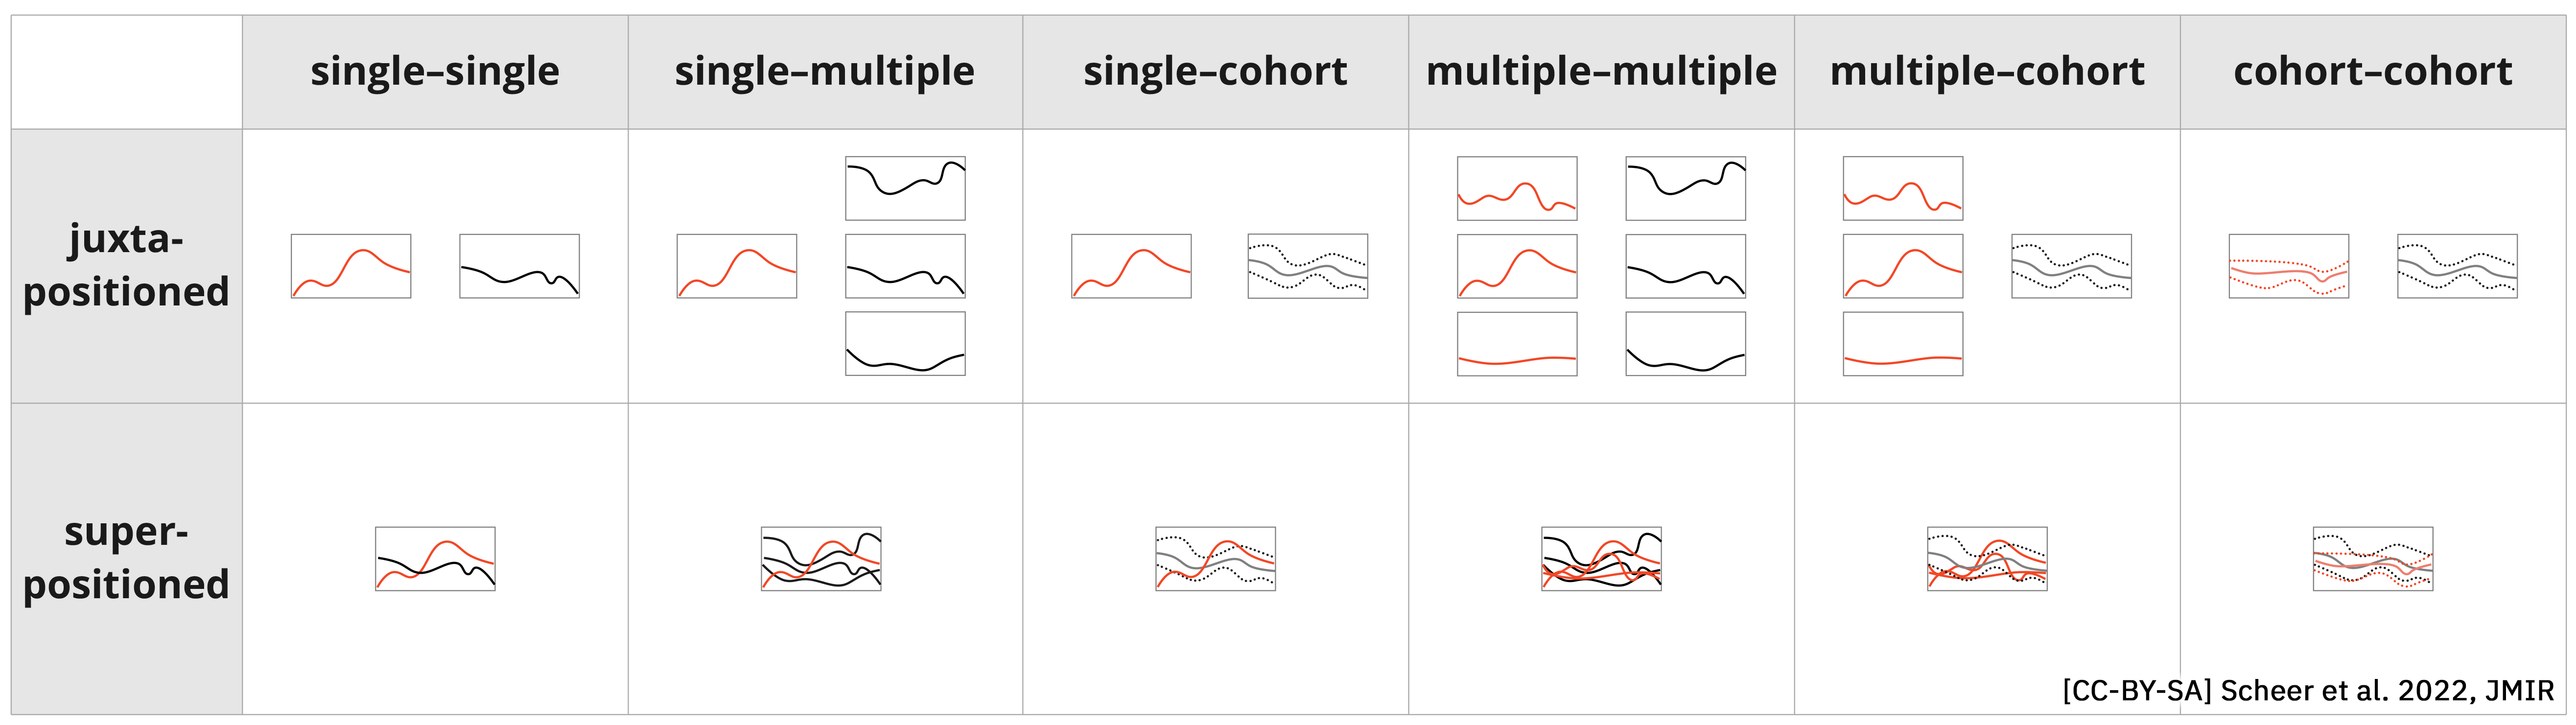 Possible combinations of line charts for comparing single patients, multiple patients, and cohorts.